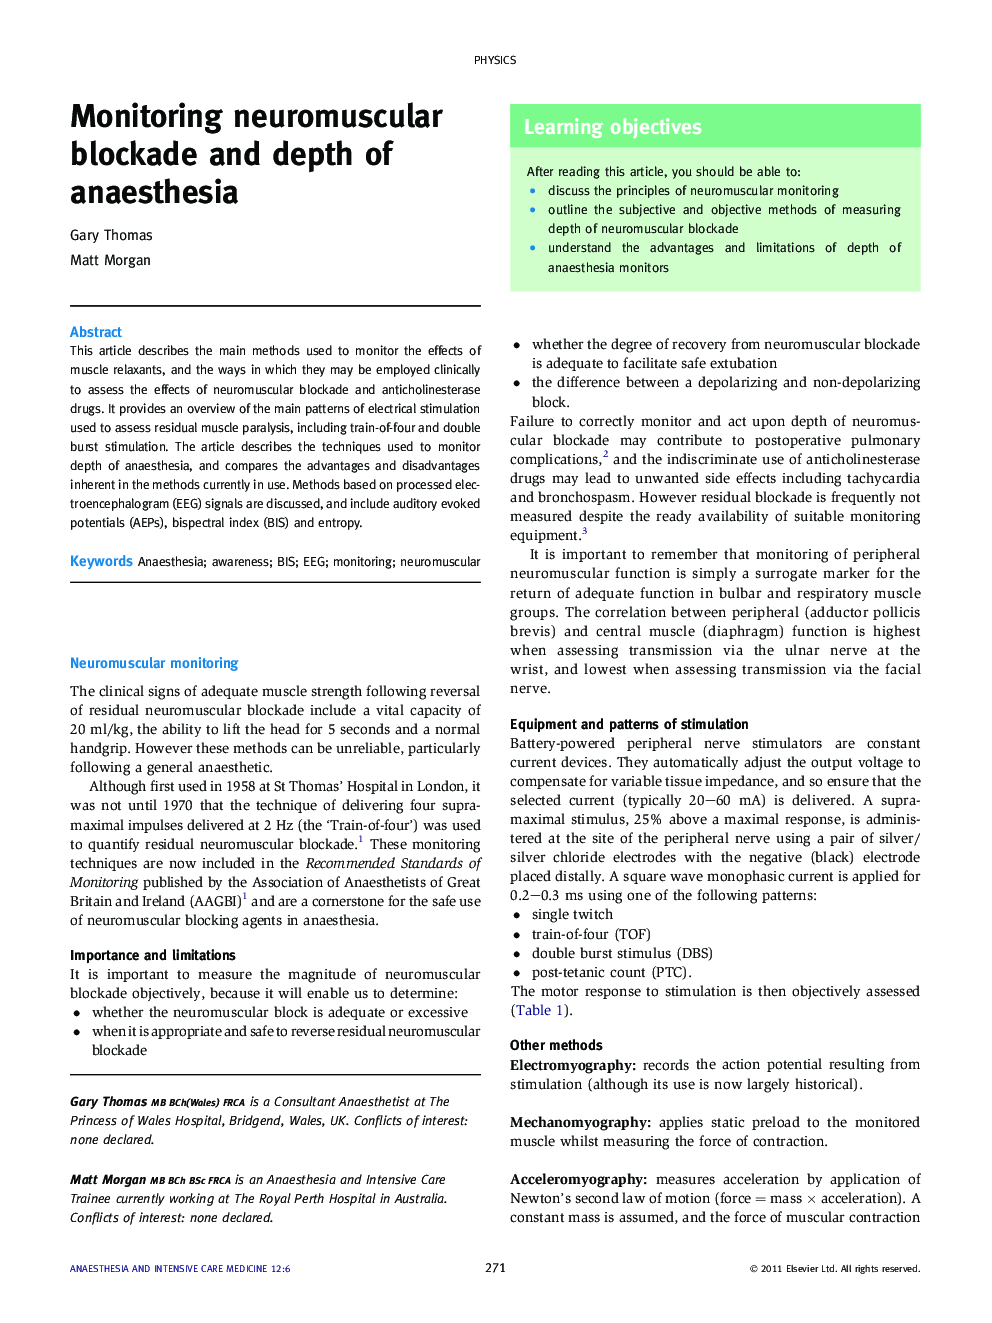 Monitoring neuromuscular blockade and depth of anaesthesia